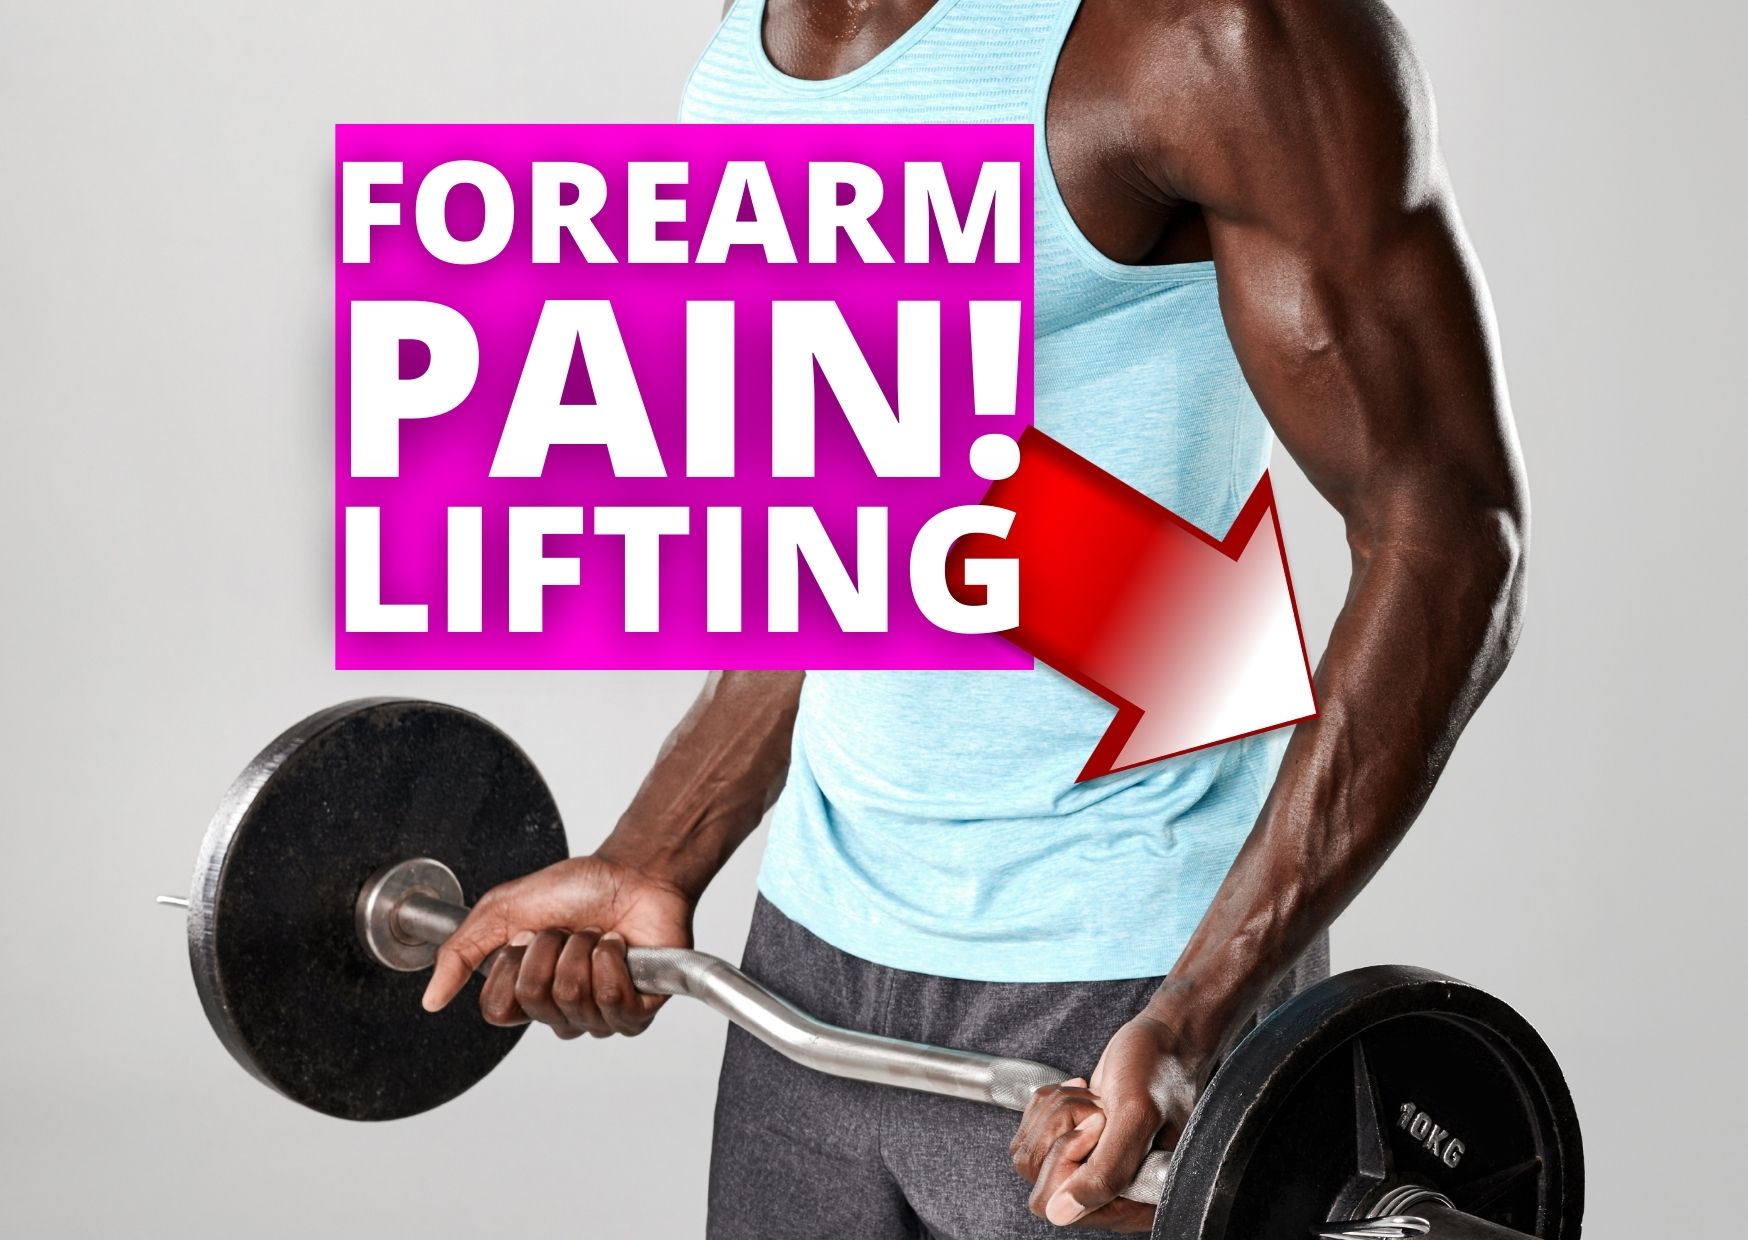 Quote Intermediate Incredible 4 Reasons You're Getting Forearm Pain When Lifting - Loving Life